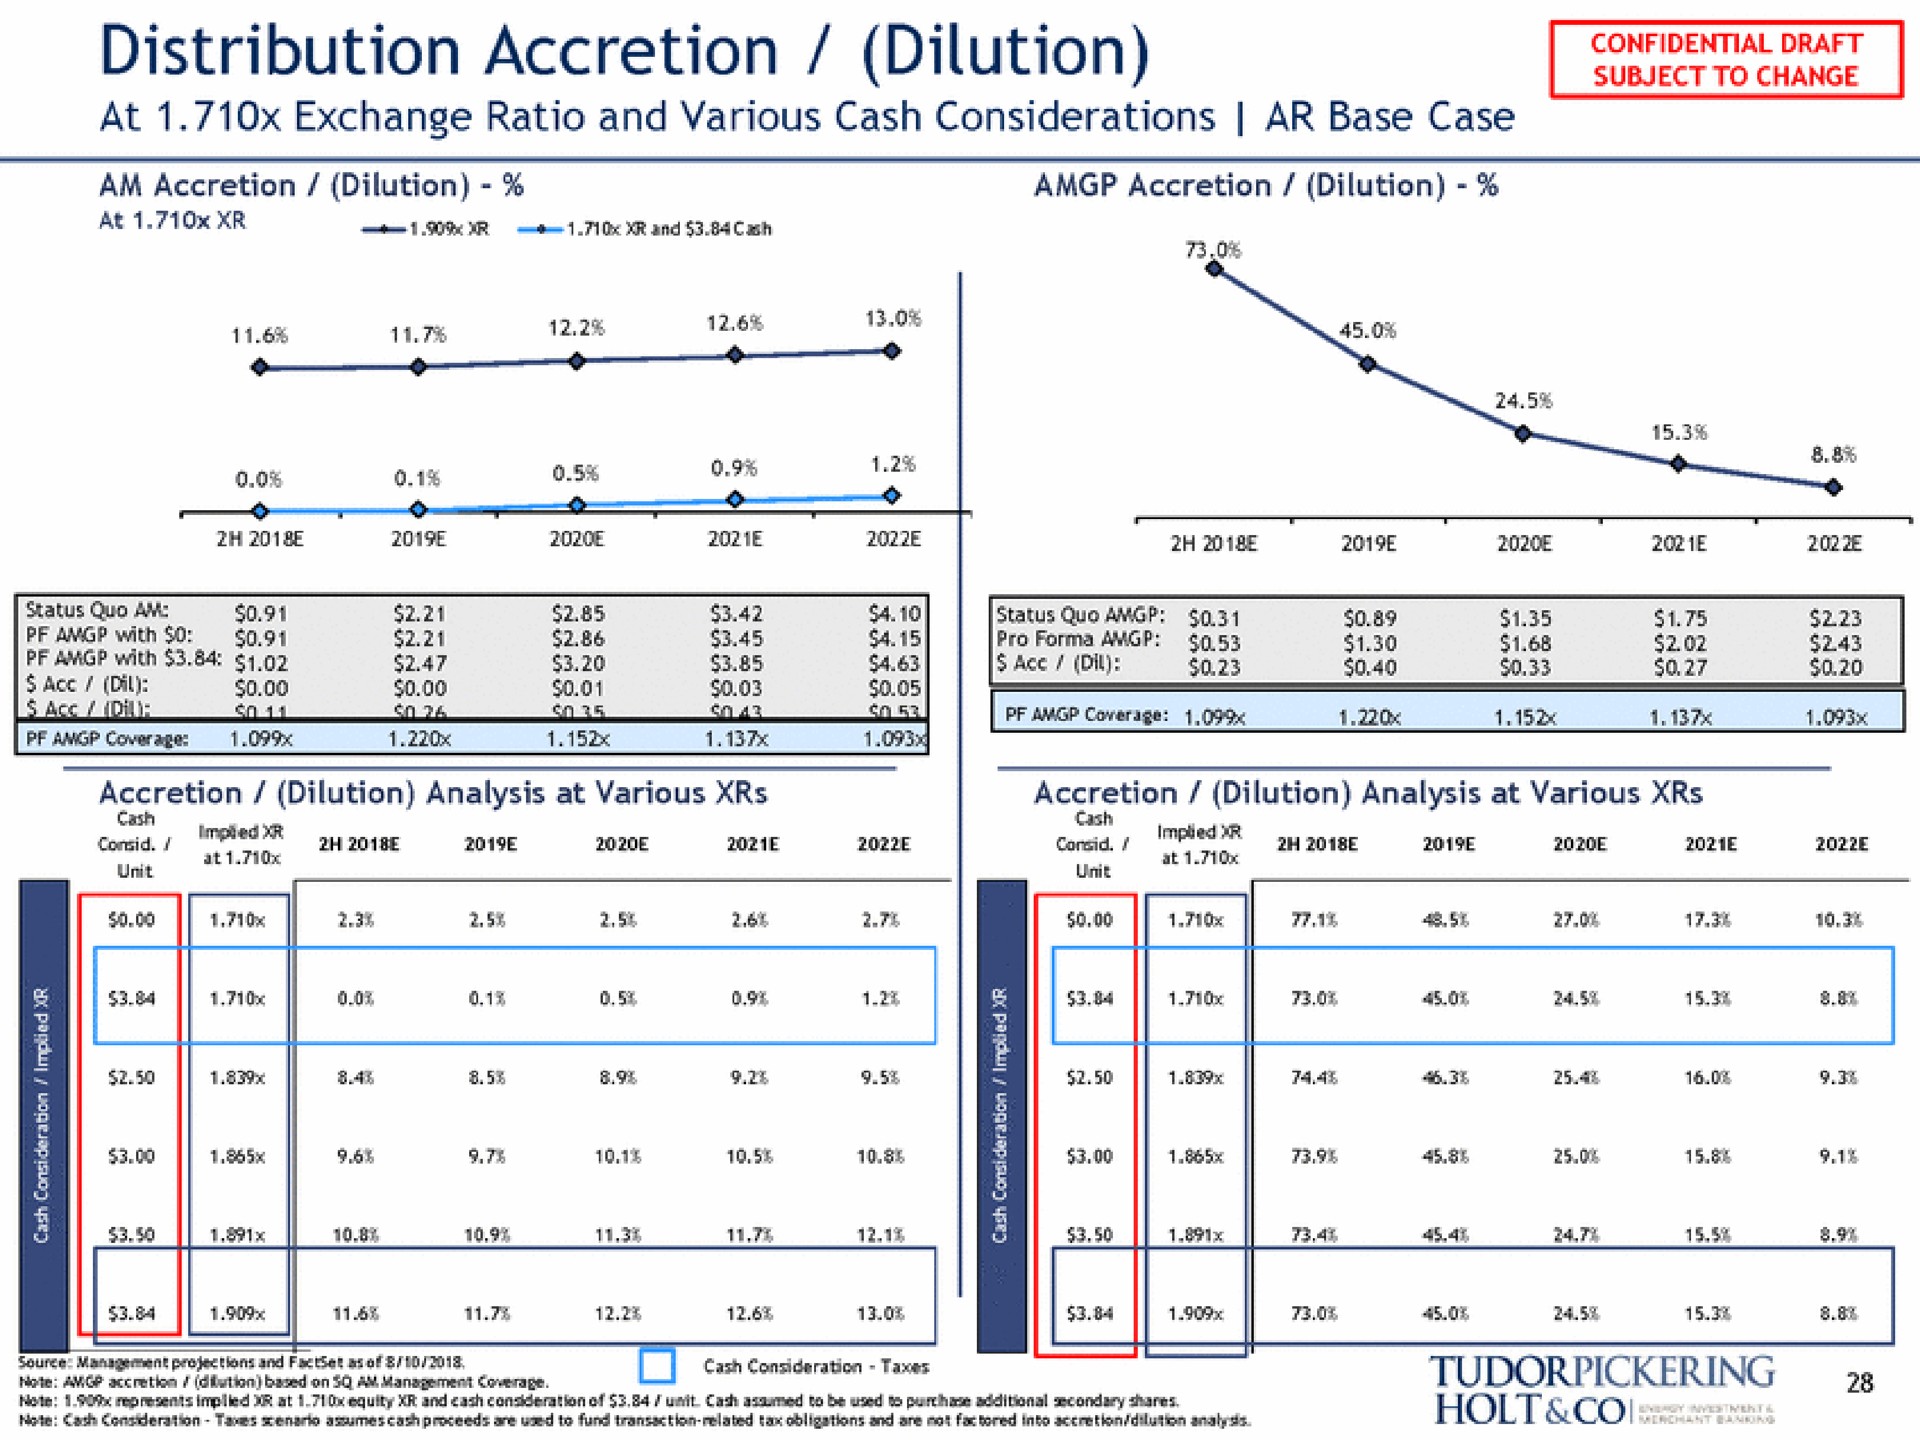 distribution accretion dilution at exchange ratio and various cash considerations base case | Tudor, Pickering, Holt & Co